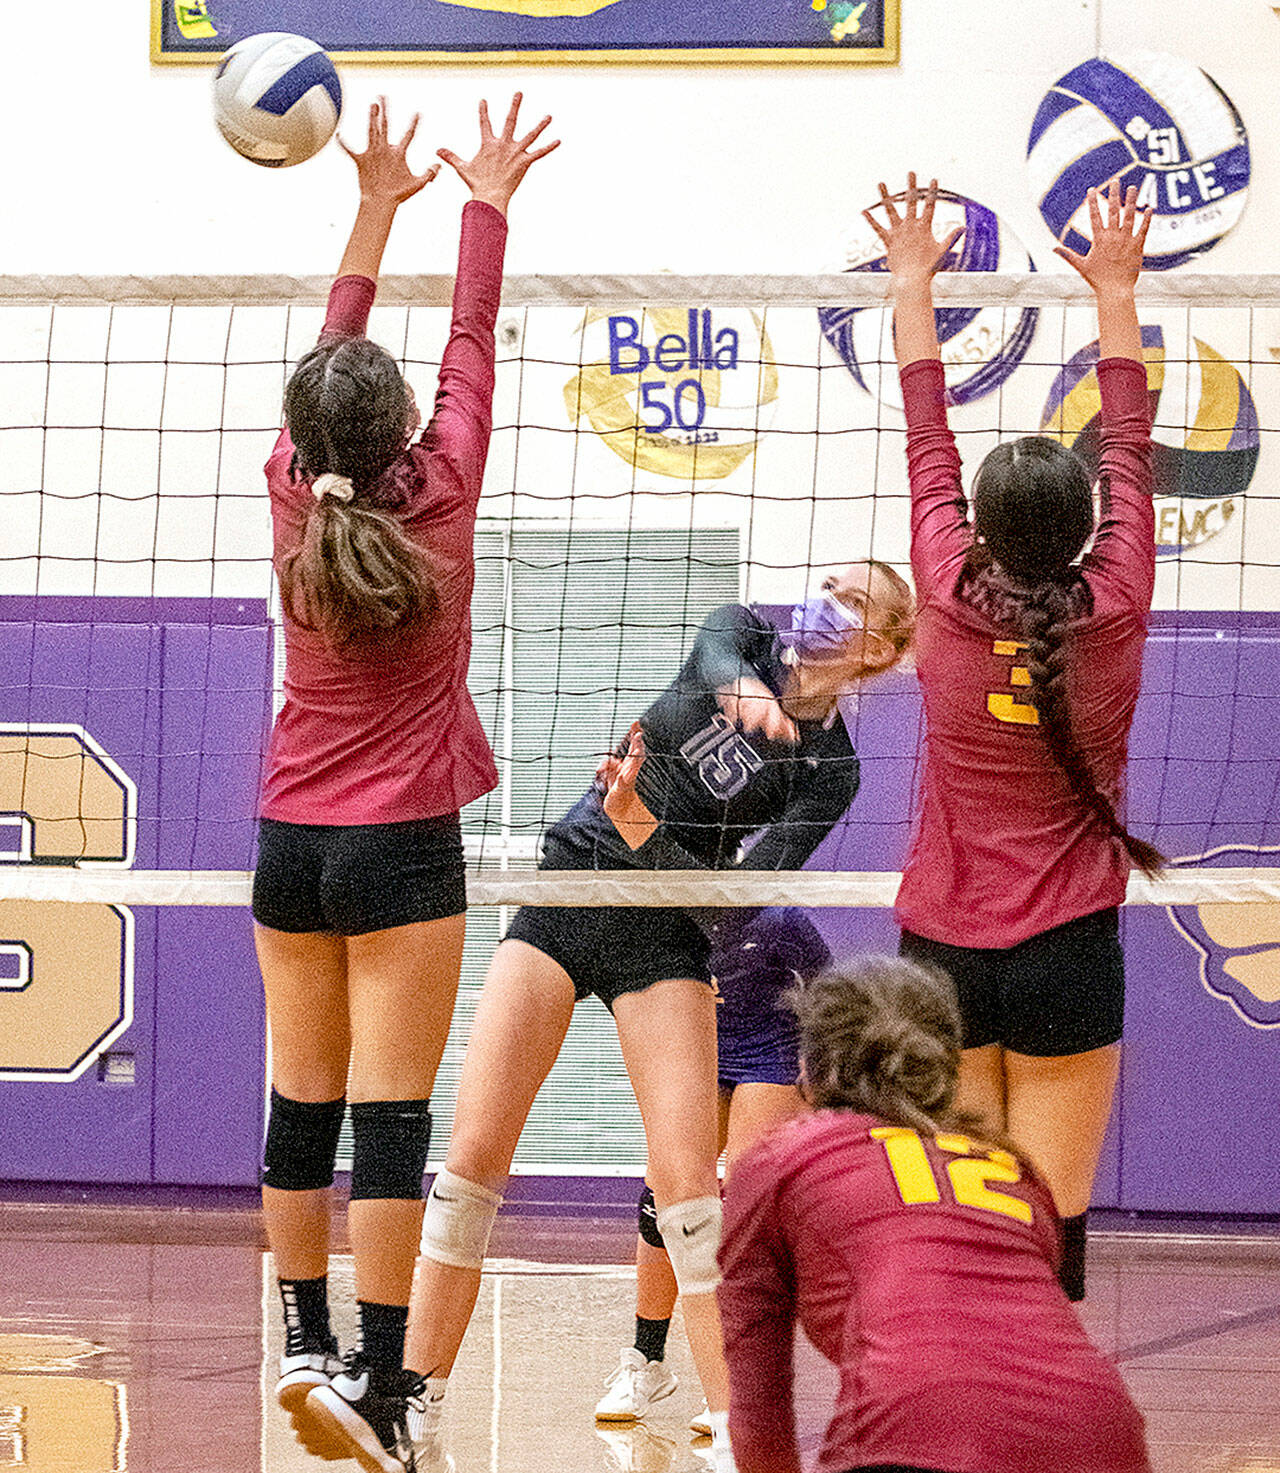 Sequim’s Kendall Hastings, center, hits past a couple of Kingston would-be blockers in a Olympic League 2A volleyball match Tuesday. The Wolves won 3-1, to improve to 4-2 in league play. (Emily Matthiessen/Olympic Peninsula News Group)